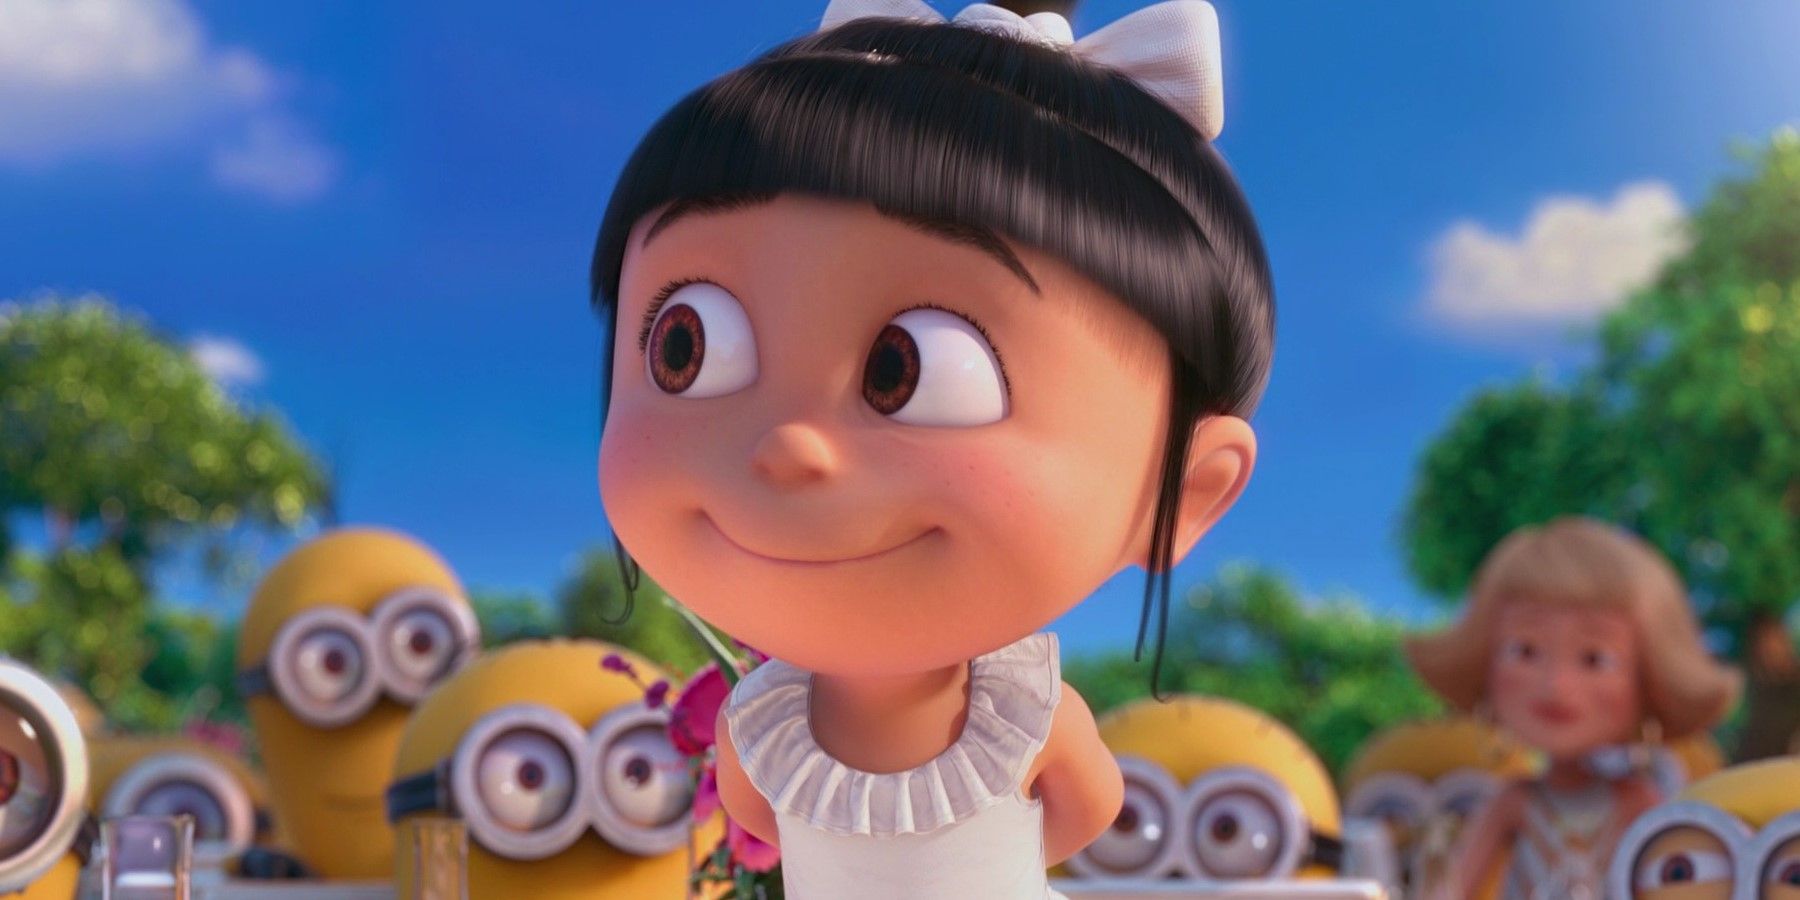 Agnes wearing a white dress and looking sideways in the Despicable Me franchise